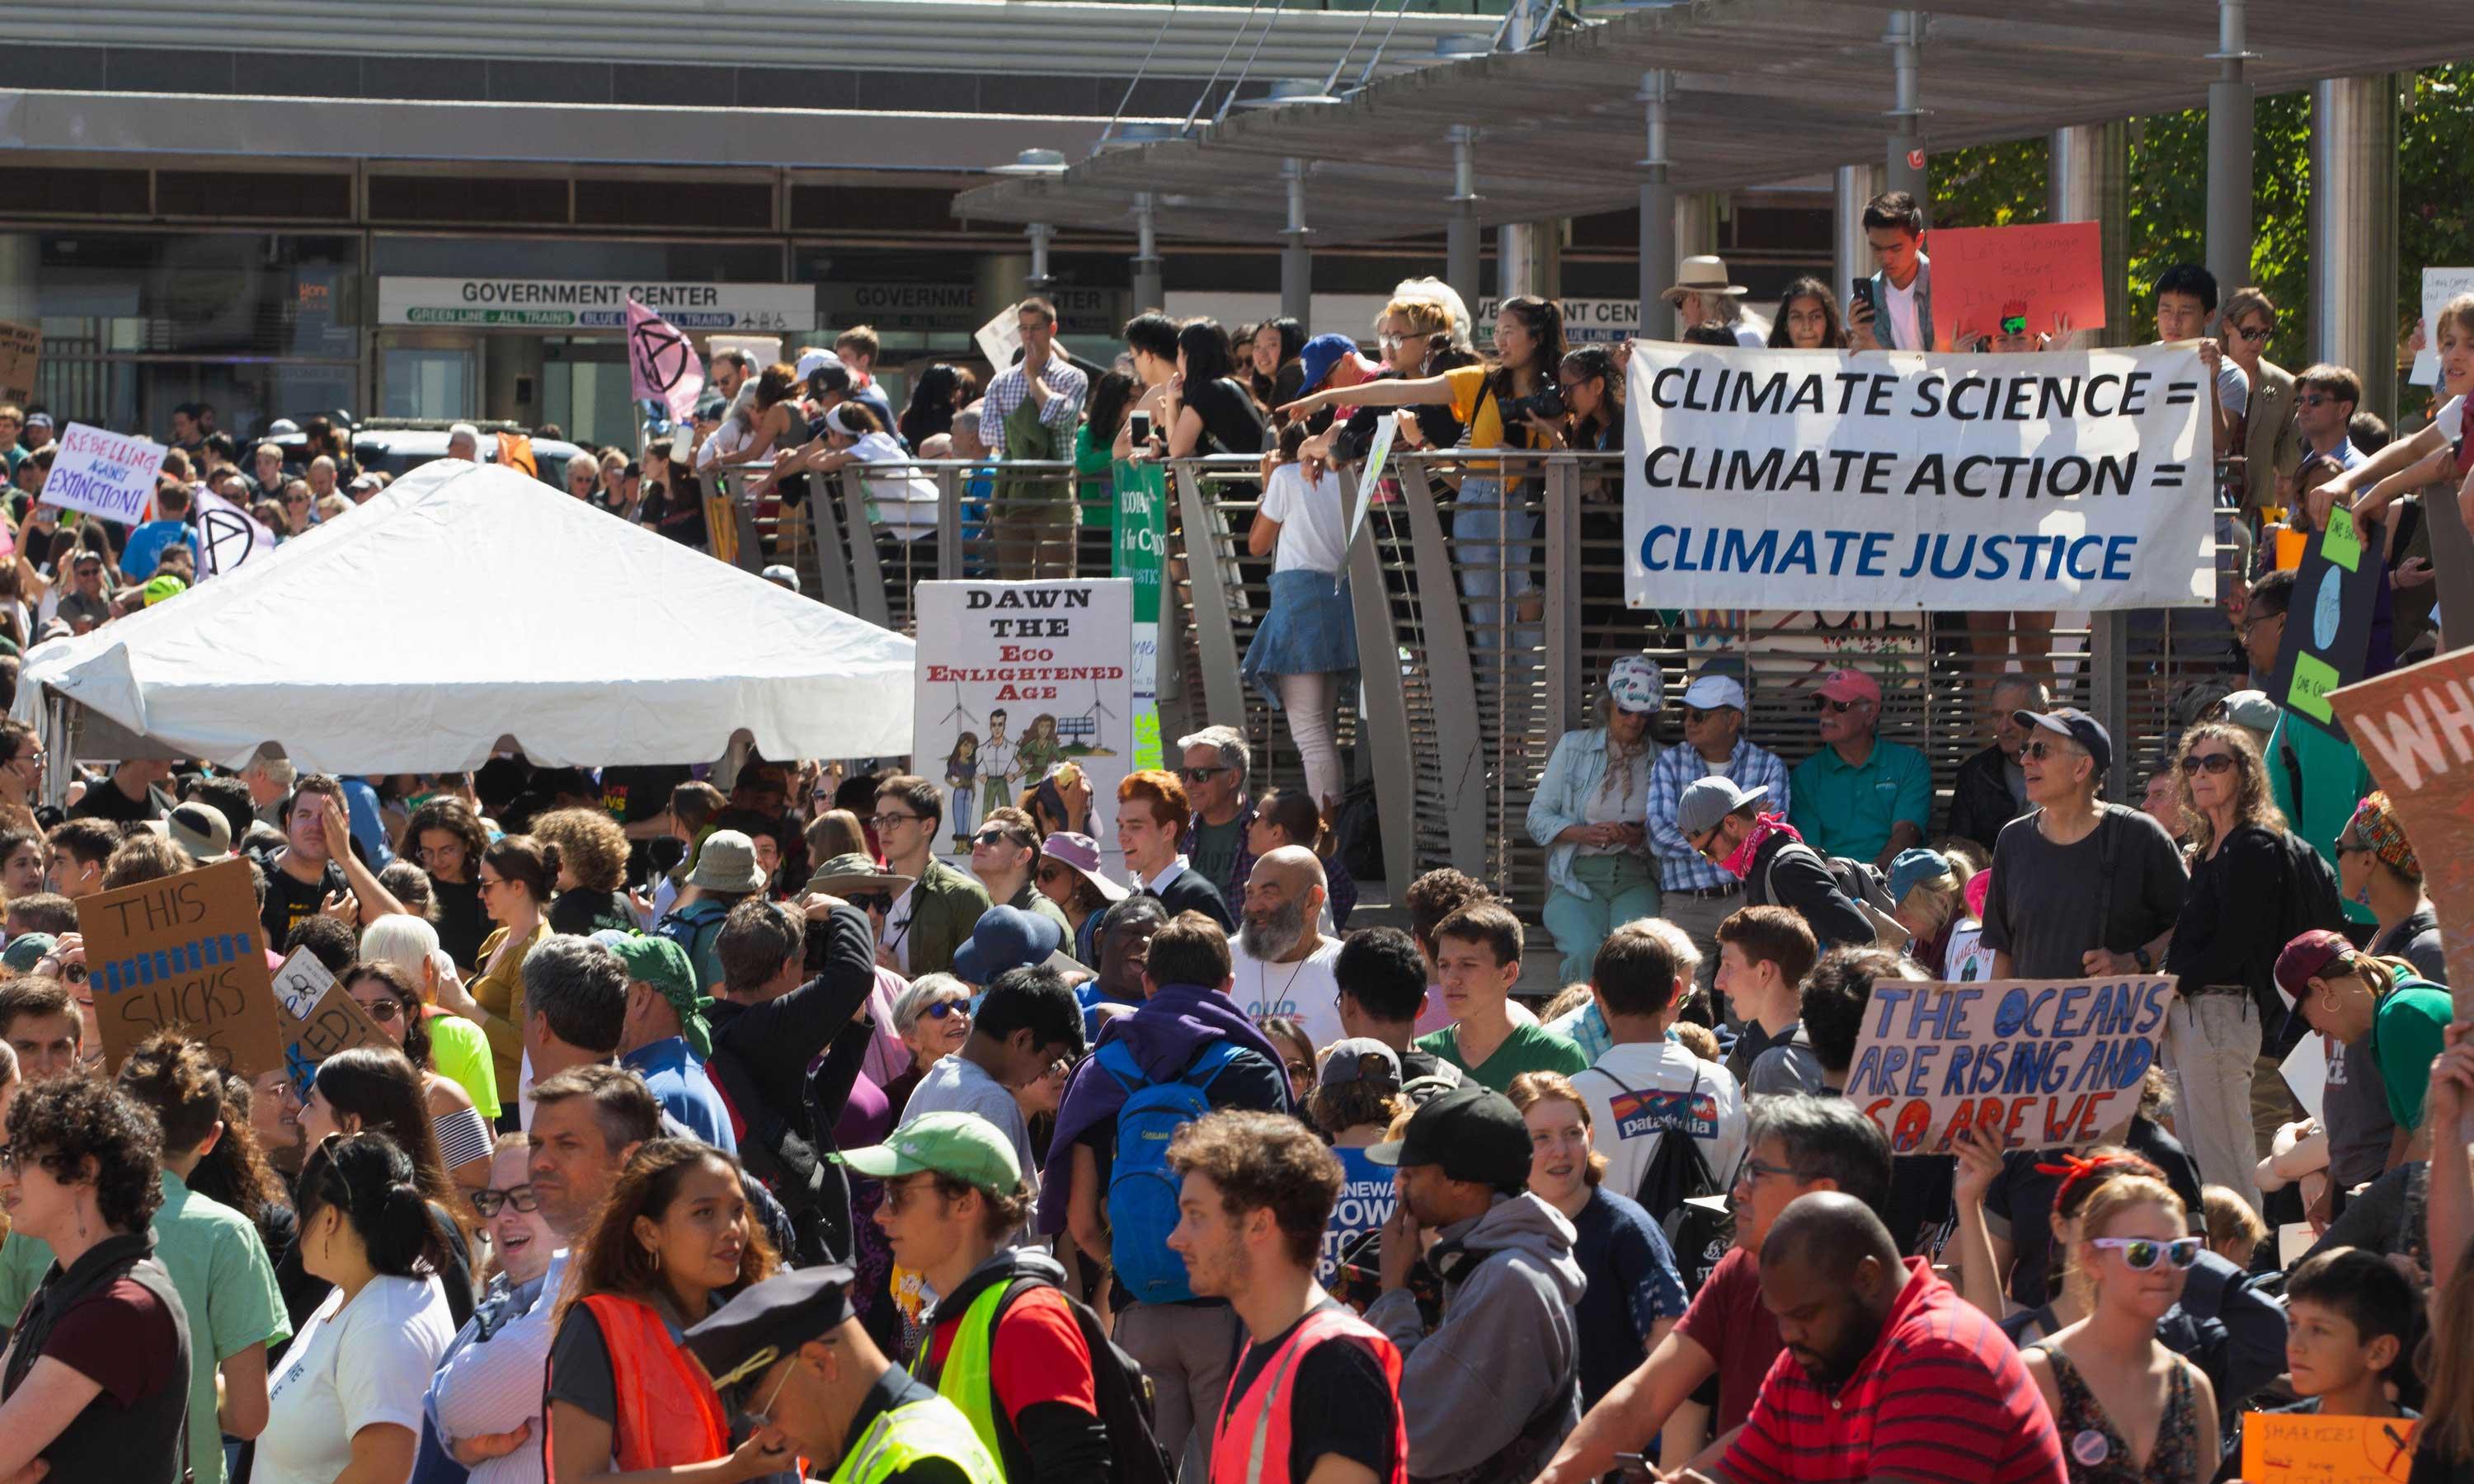 Climate activisists with science banner at protest